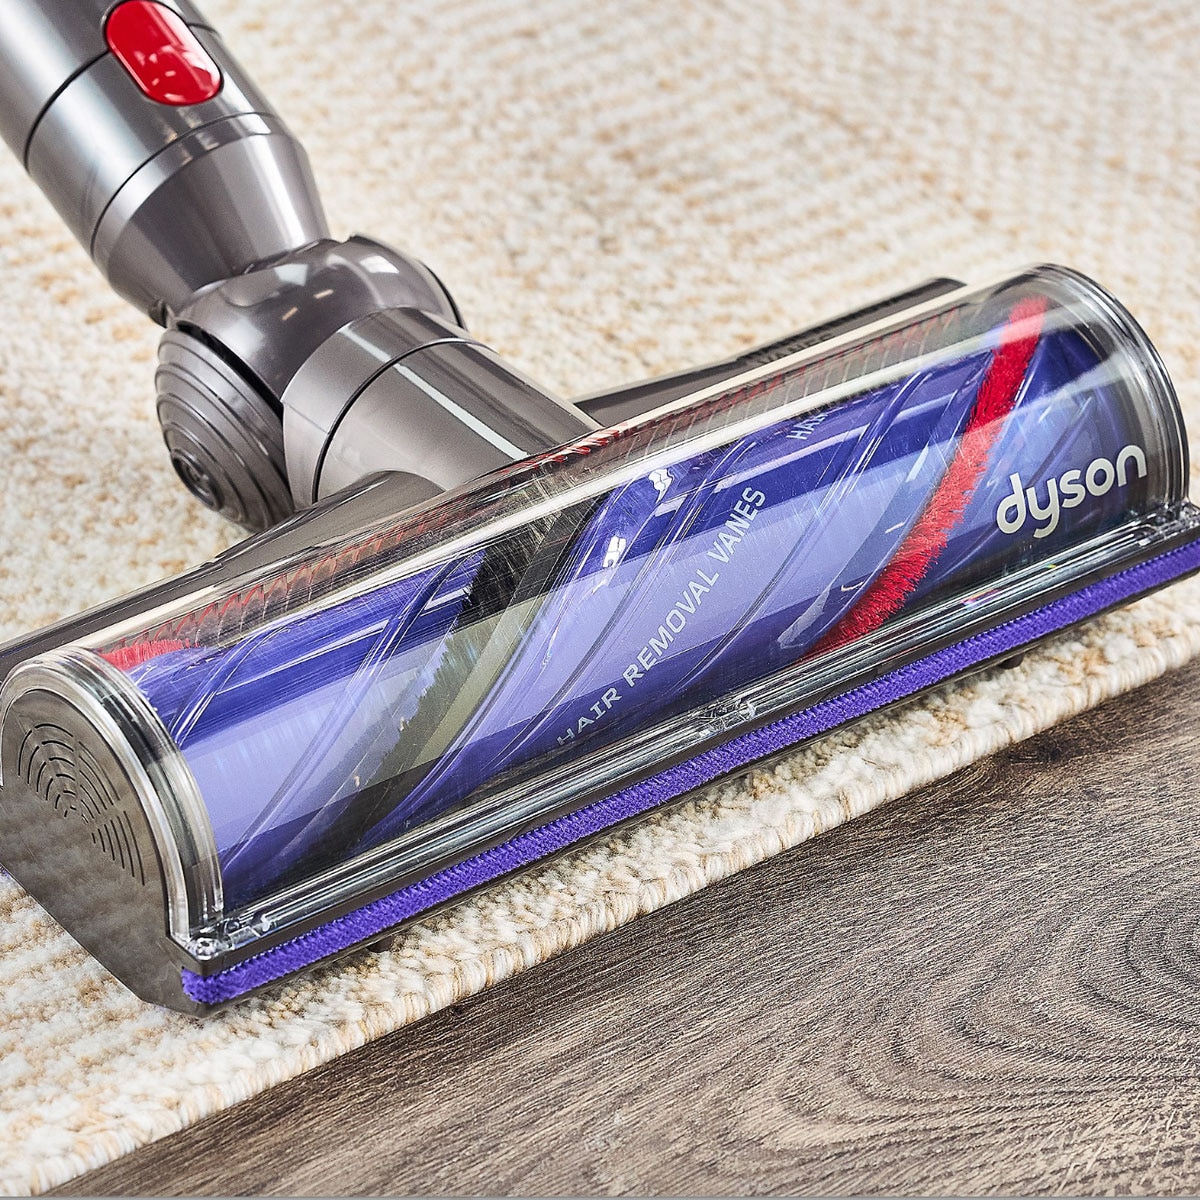 Save 0 on a Dyson Cordless Vacuum and Give Your Home a Deep Clean